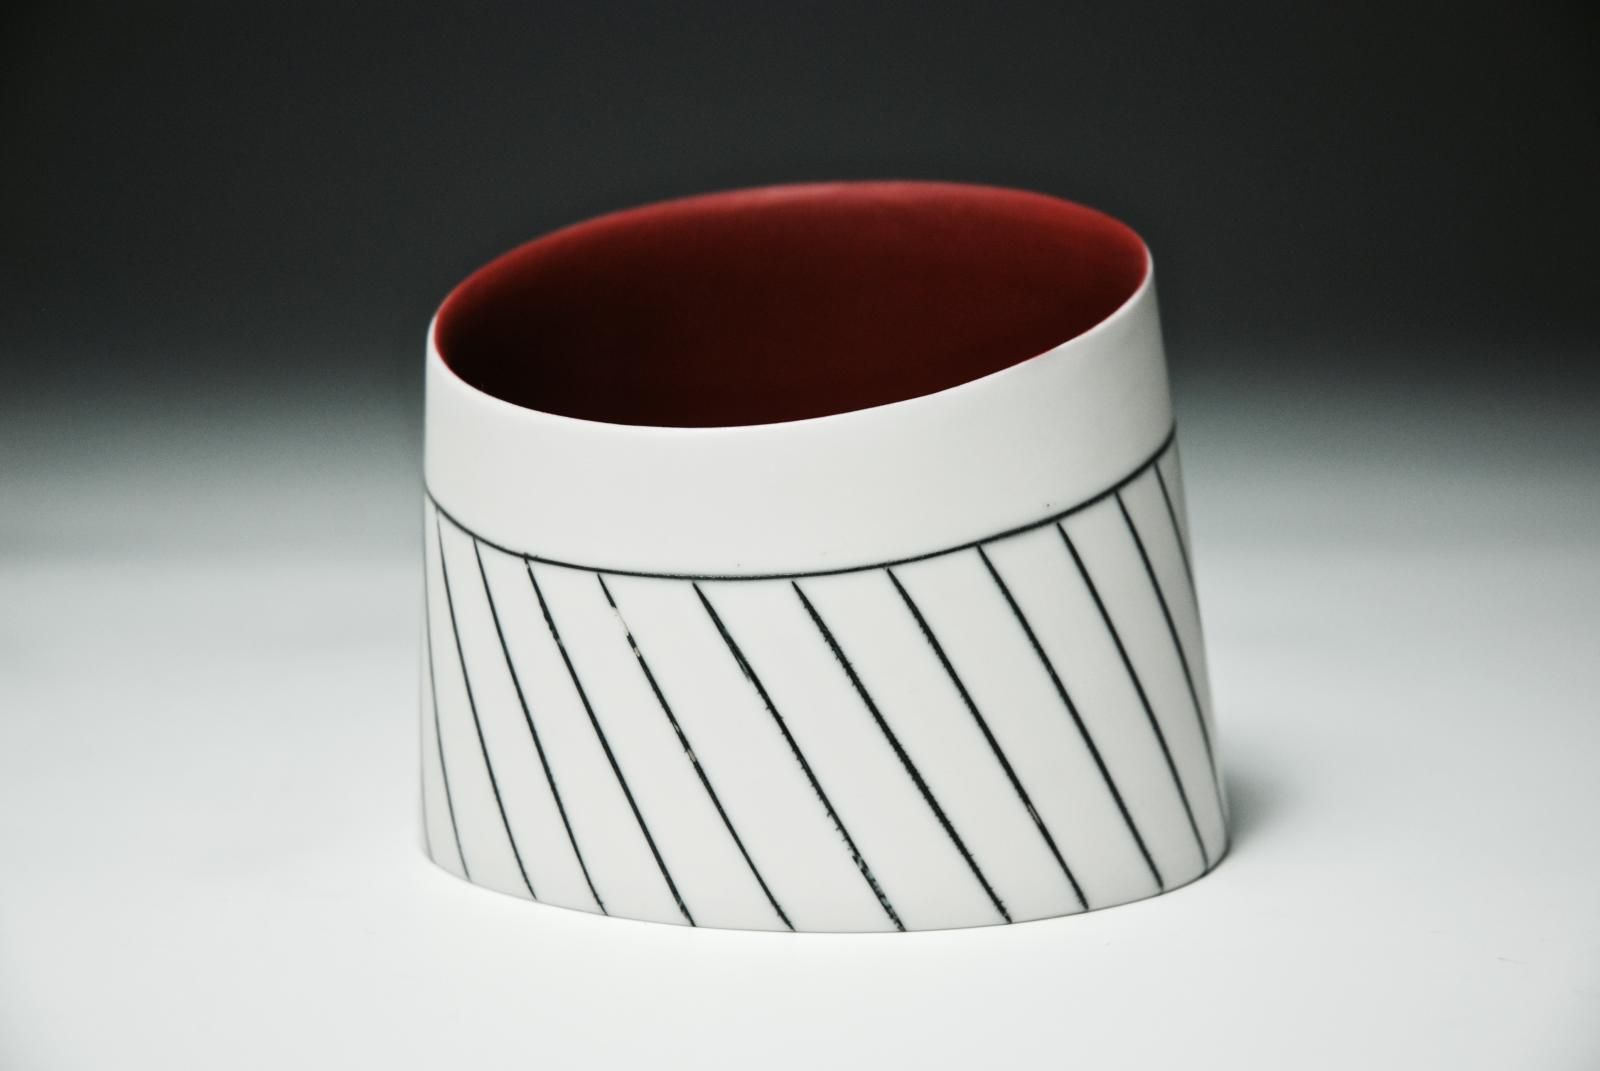 Tilted Vessel with Red interior I by Lara Scobie